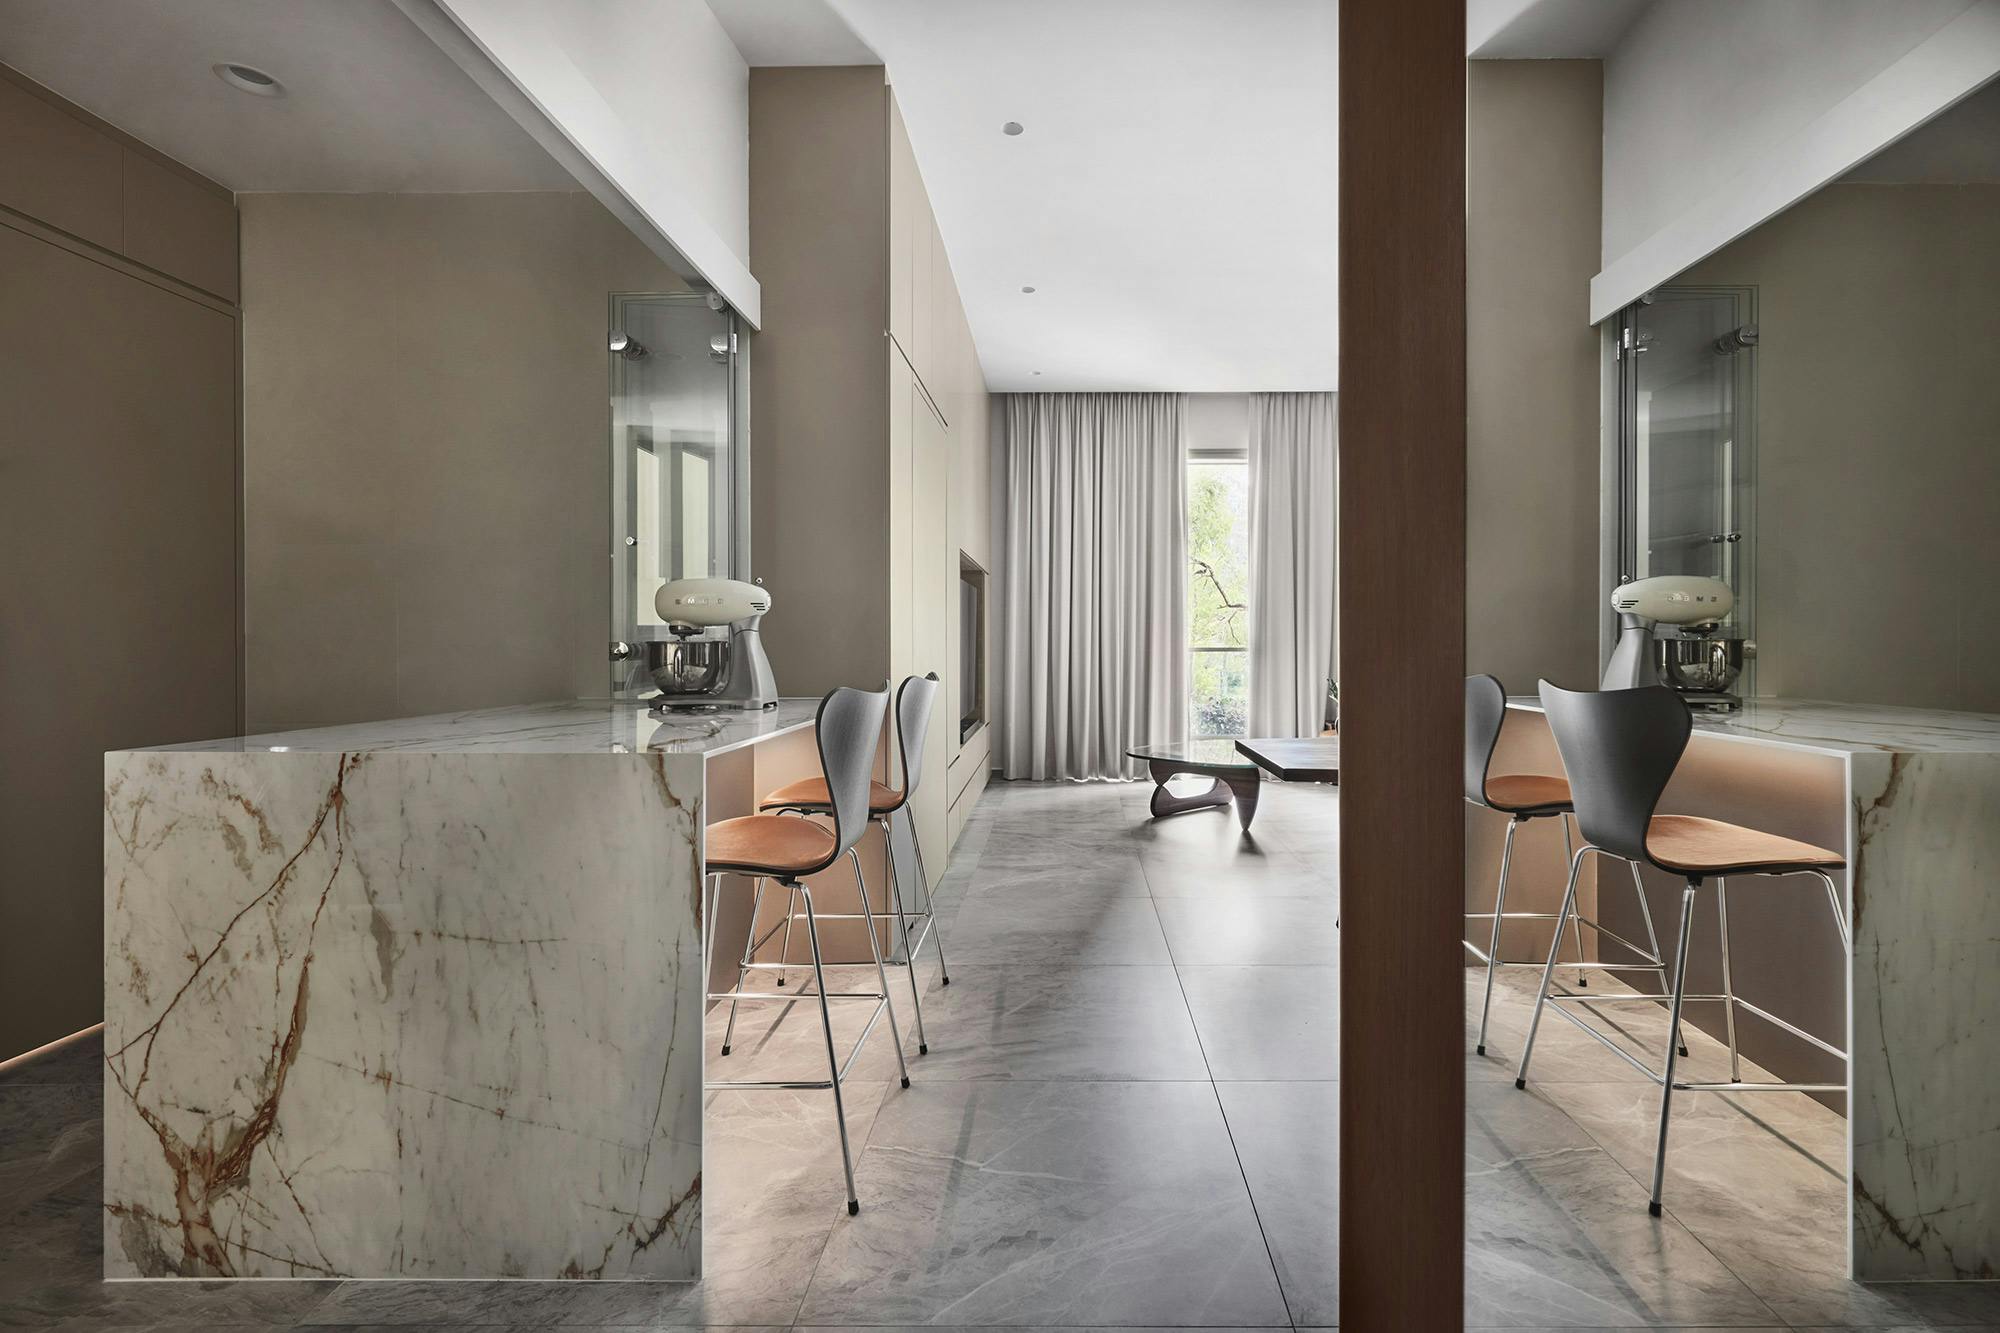 Numéro d'image 36 de la section actuelle de Dekton Sirius adds a welcoming touch to the kitchens of a residential development in Dubai de Cosentino France